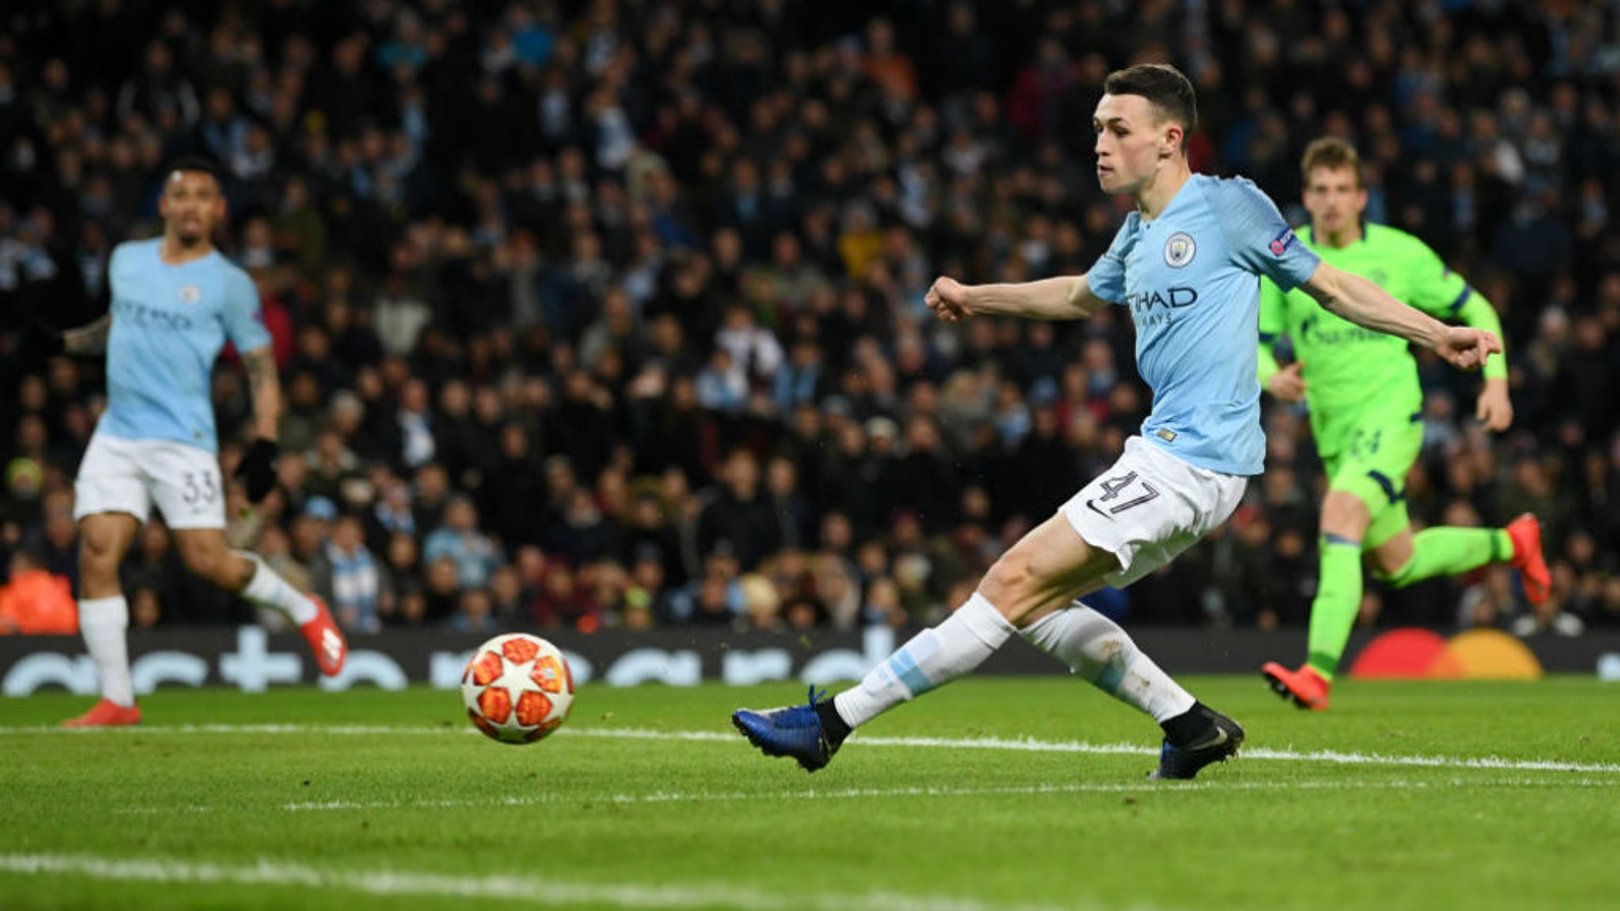 Foden called up to England U21 squad  ​